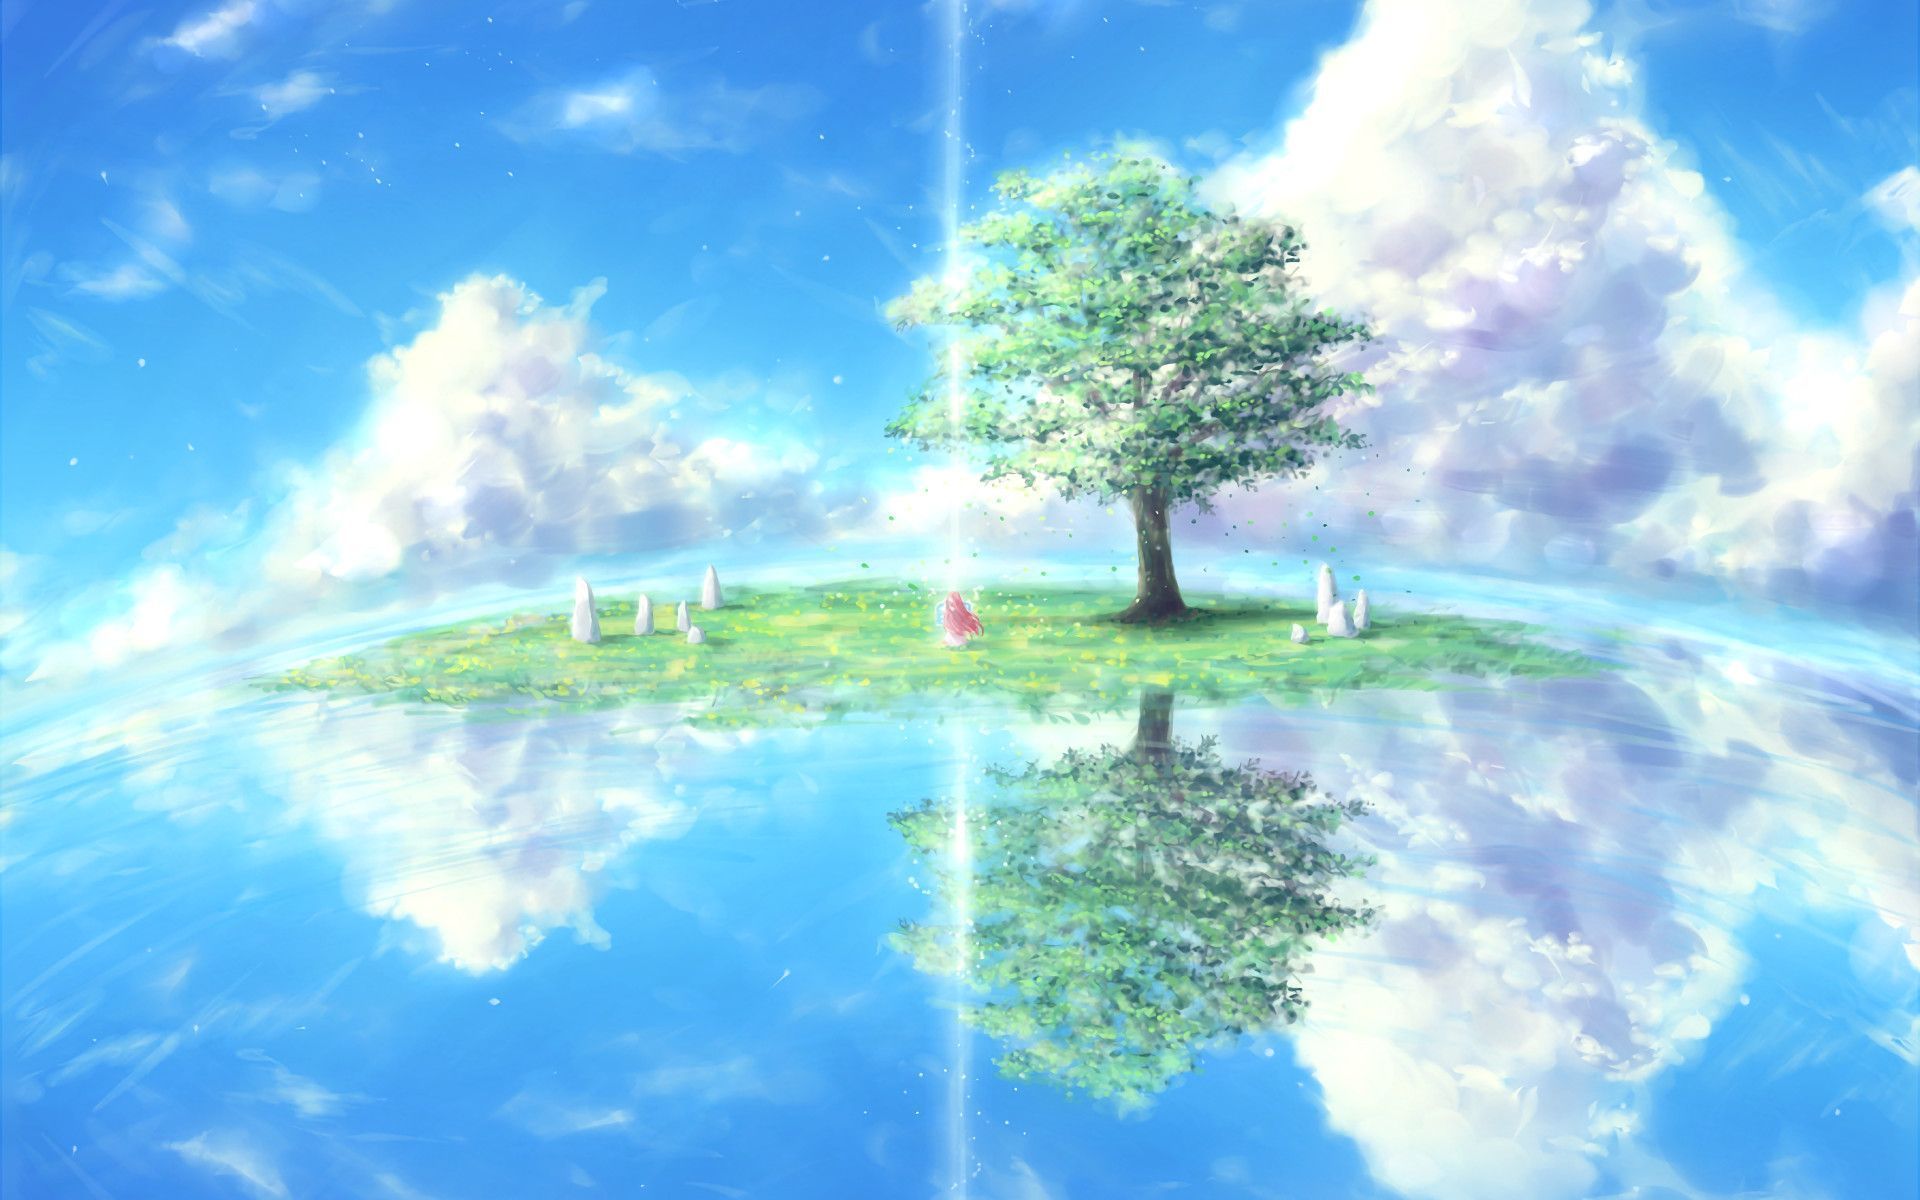 Anime Nature Wallpaper Free Anime Nature Background